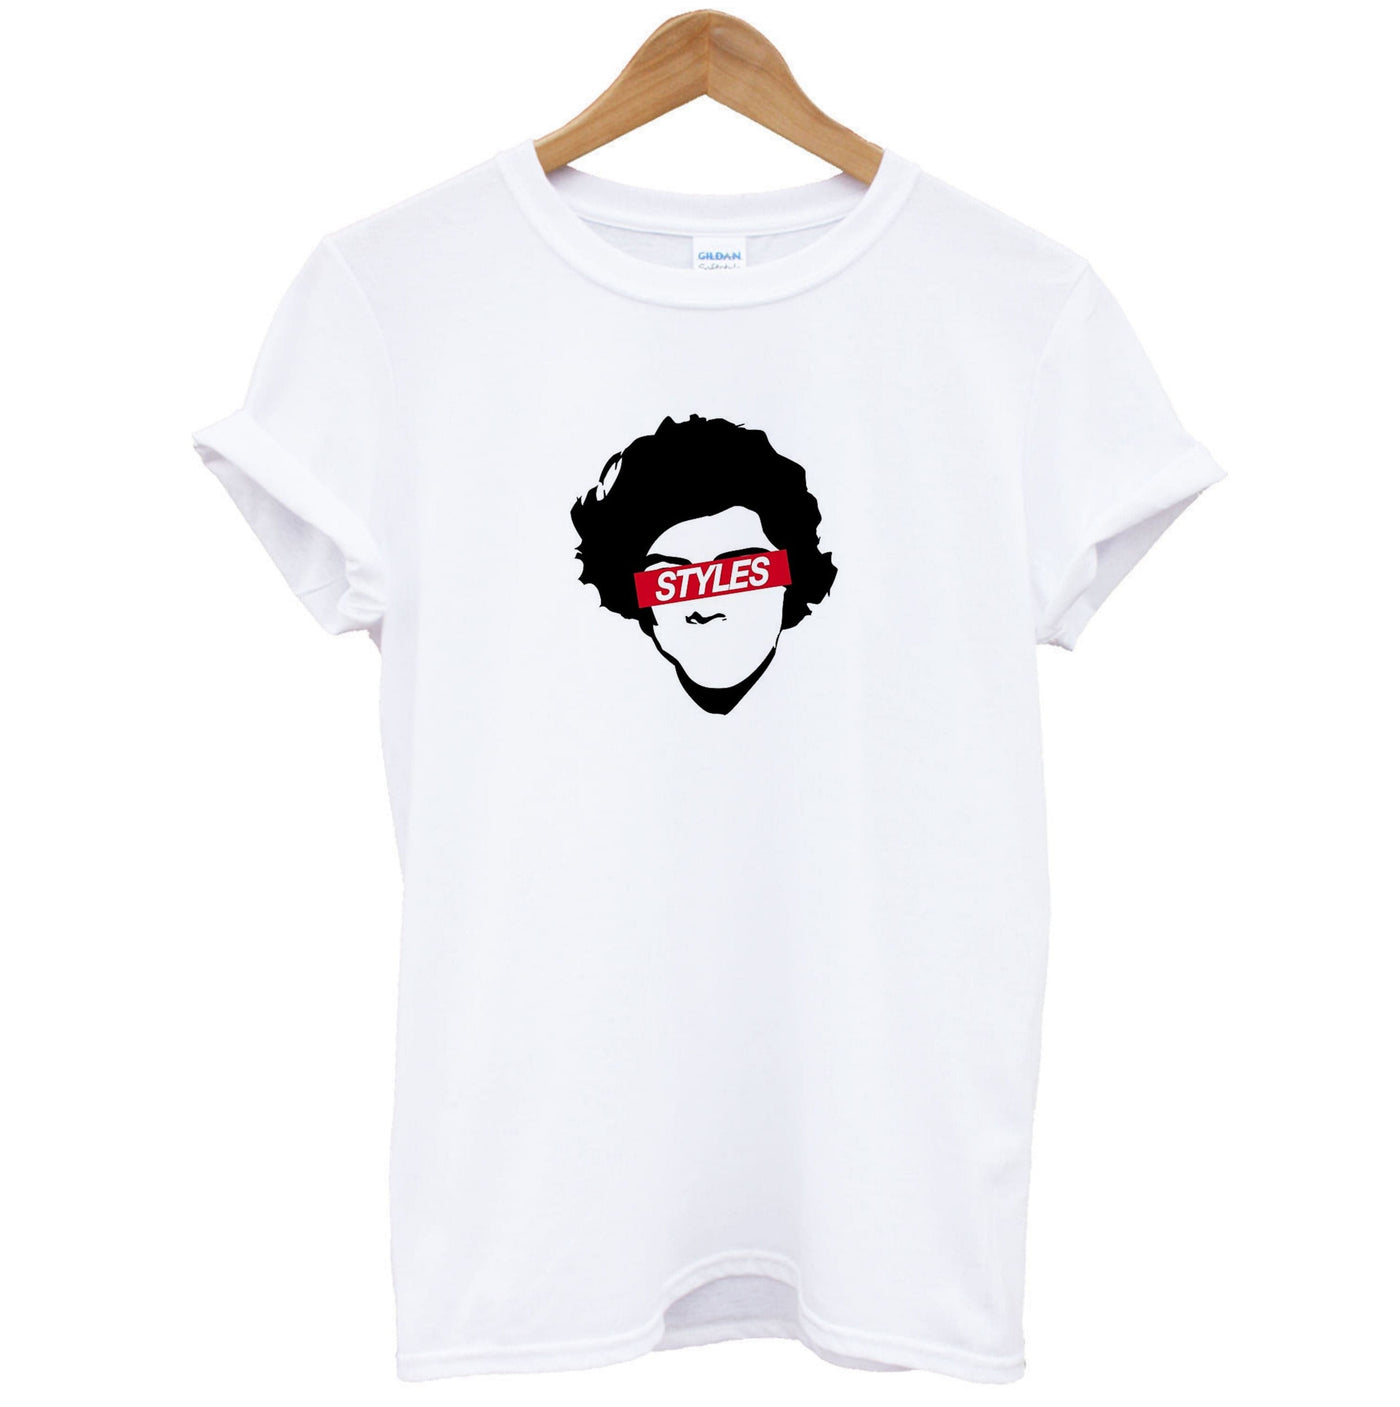 Red Styles Eyes - Harry Styles T-Shirt